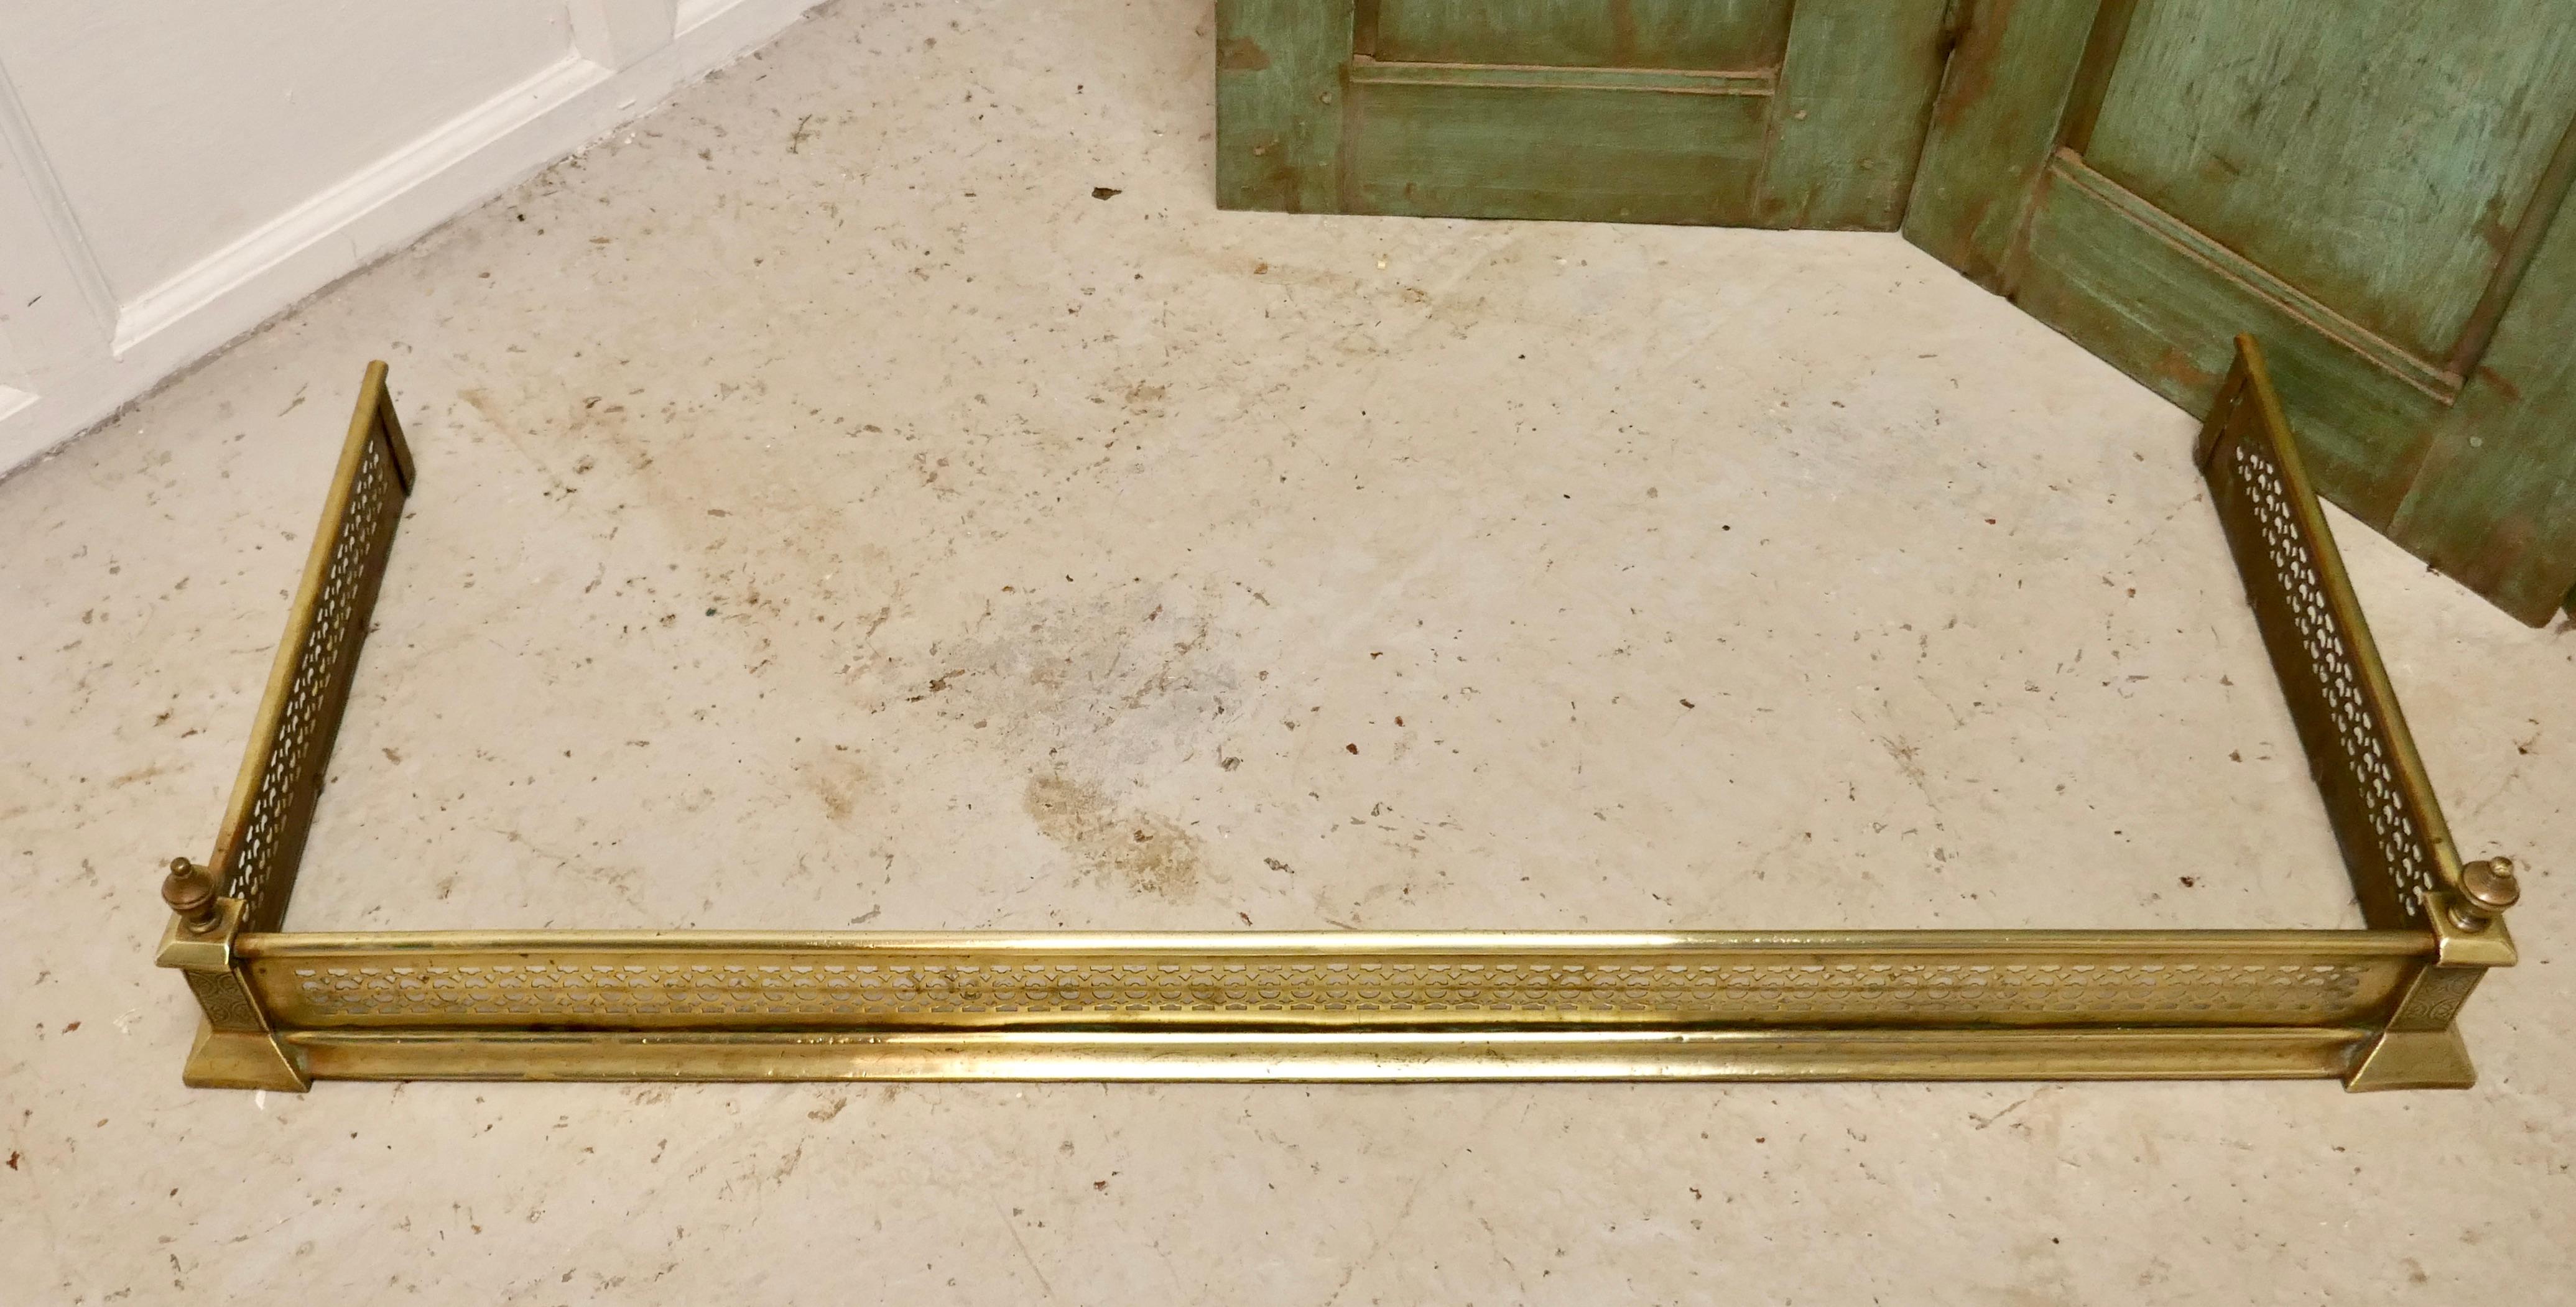 Long Victorian pierced brass fender

This is a top quality Victorian pierced brass fender it has a pierced decoration along the front with elegant turned and engraved finials at each end
The fender is in good condition it is 7” high, and 44” long